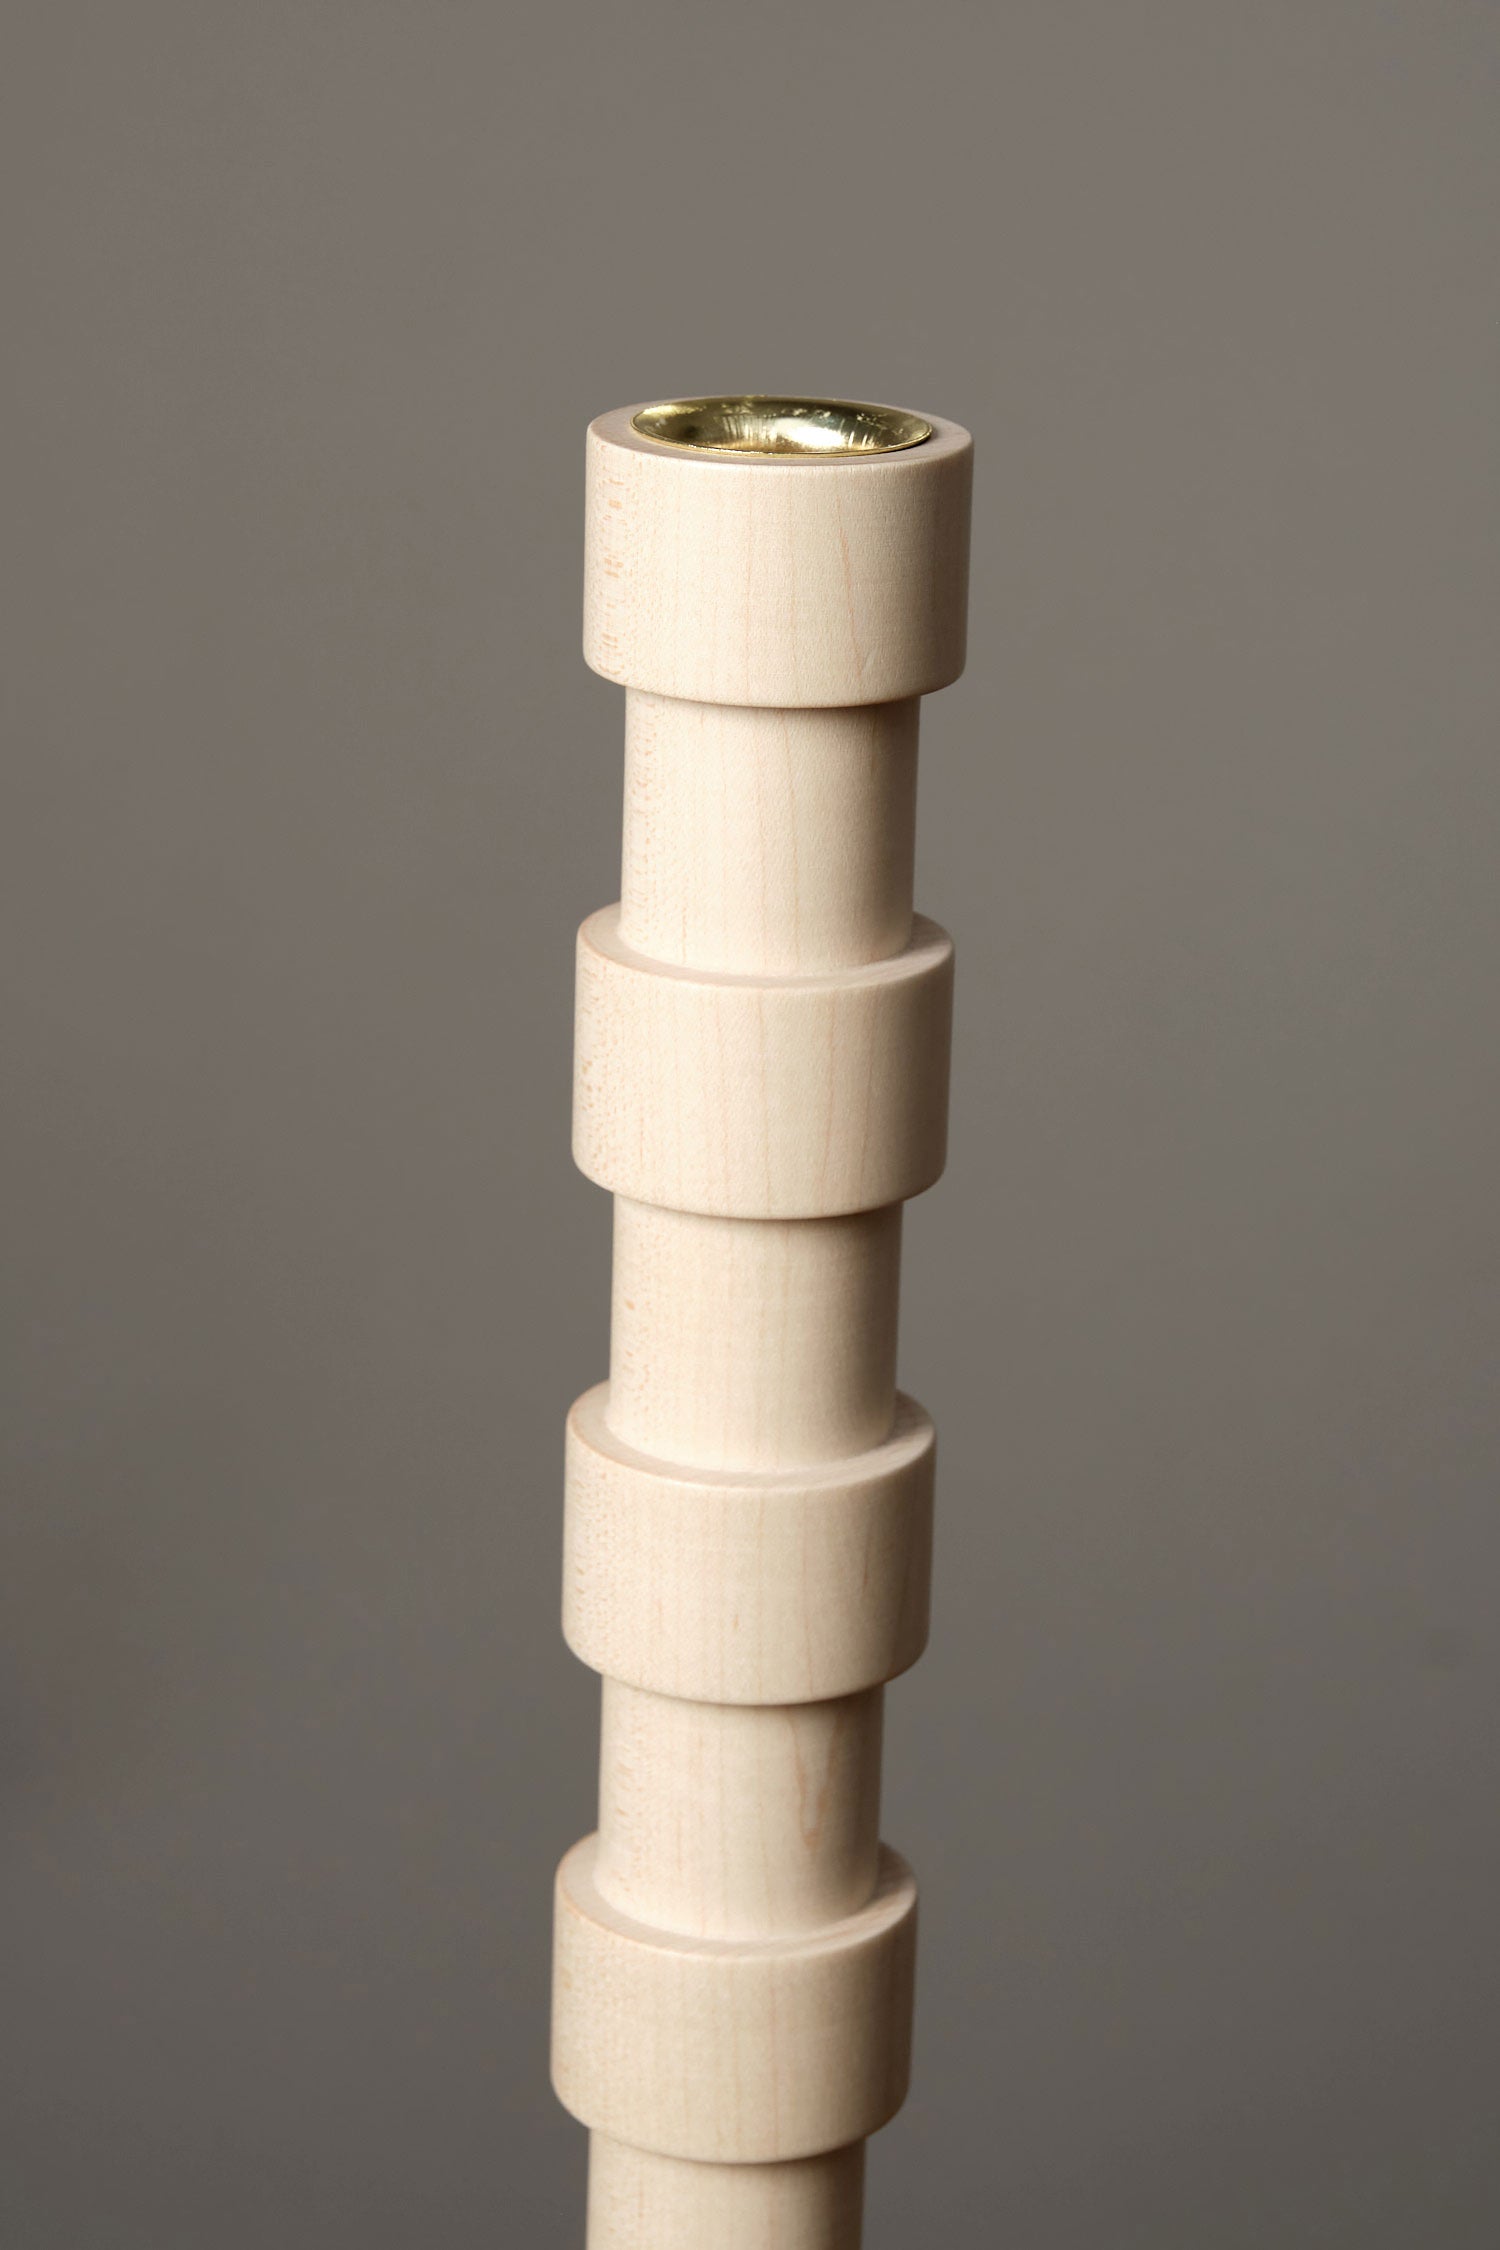 Lostine candle holder in maple